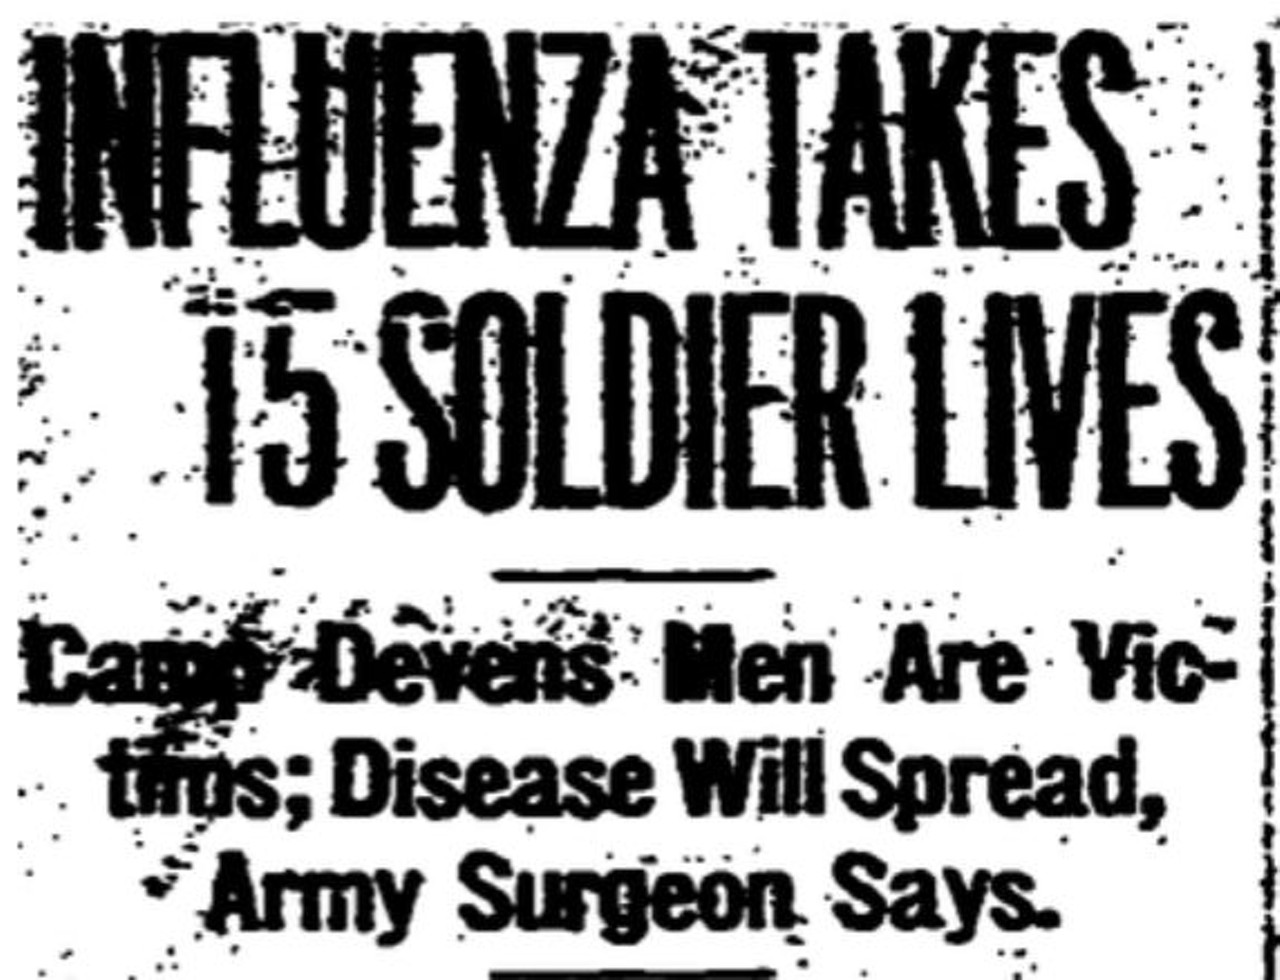 September 21st: Influenza Takes 15 Soldiers Lives: Camp Devens Men Are Victims, Disease Will Spread Army Surgeon Says